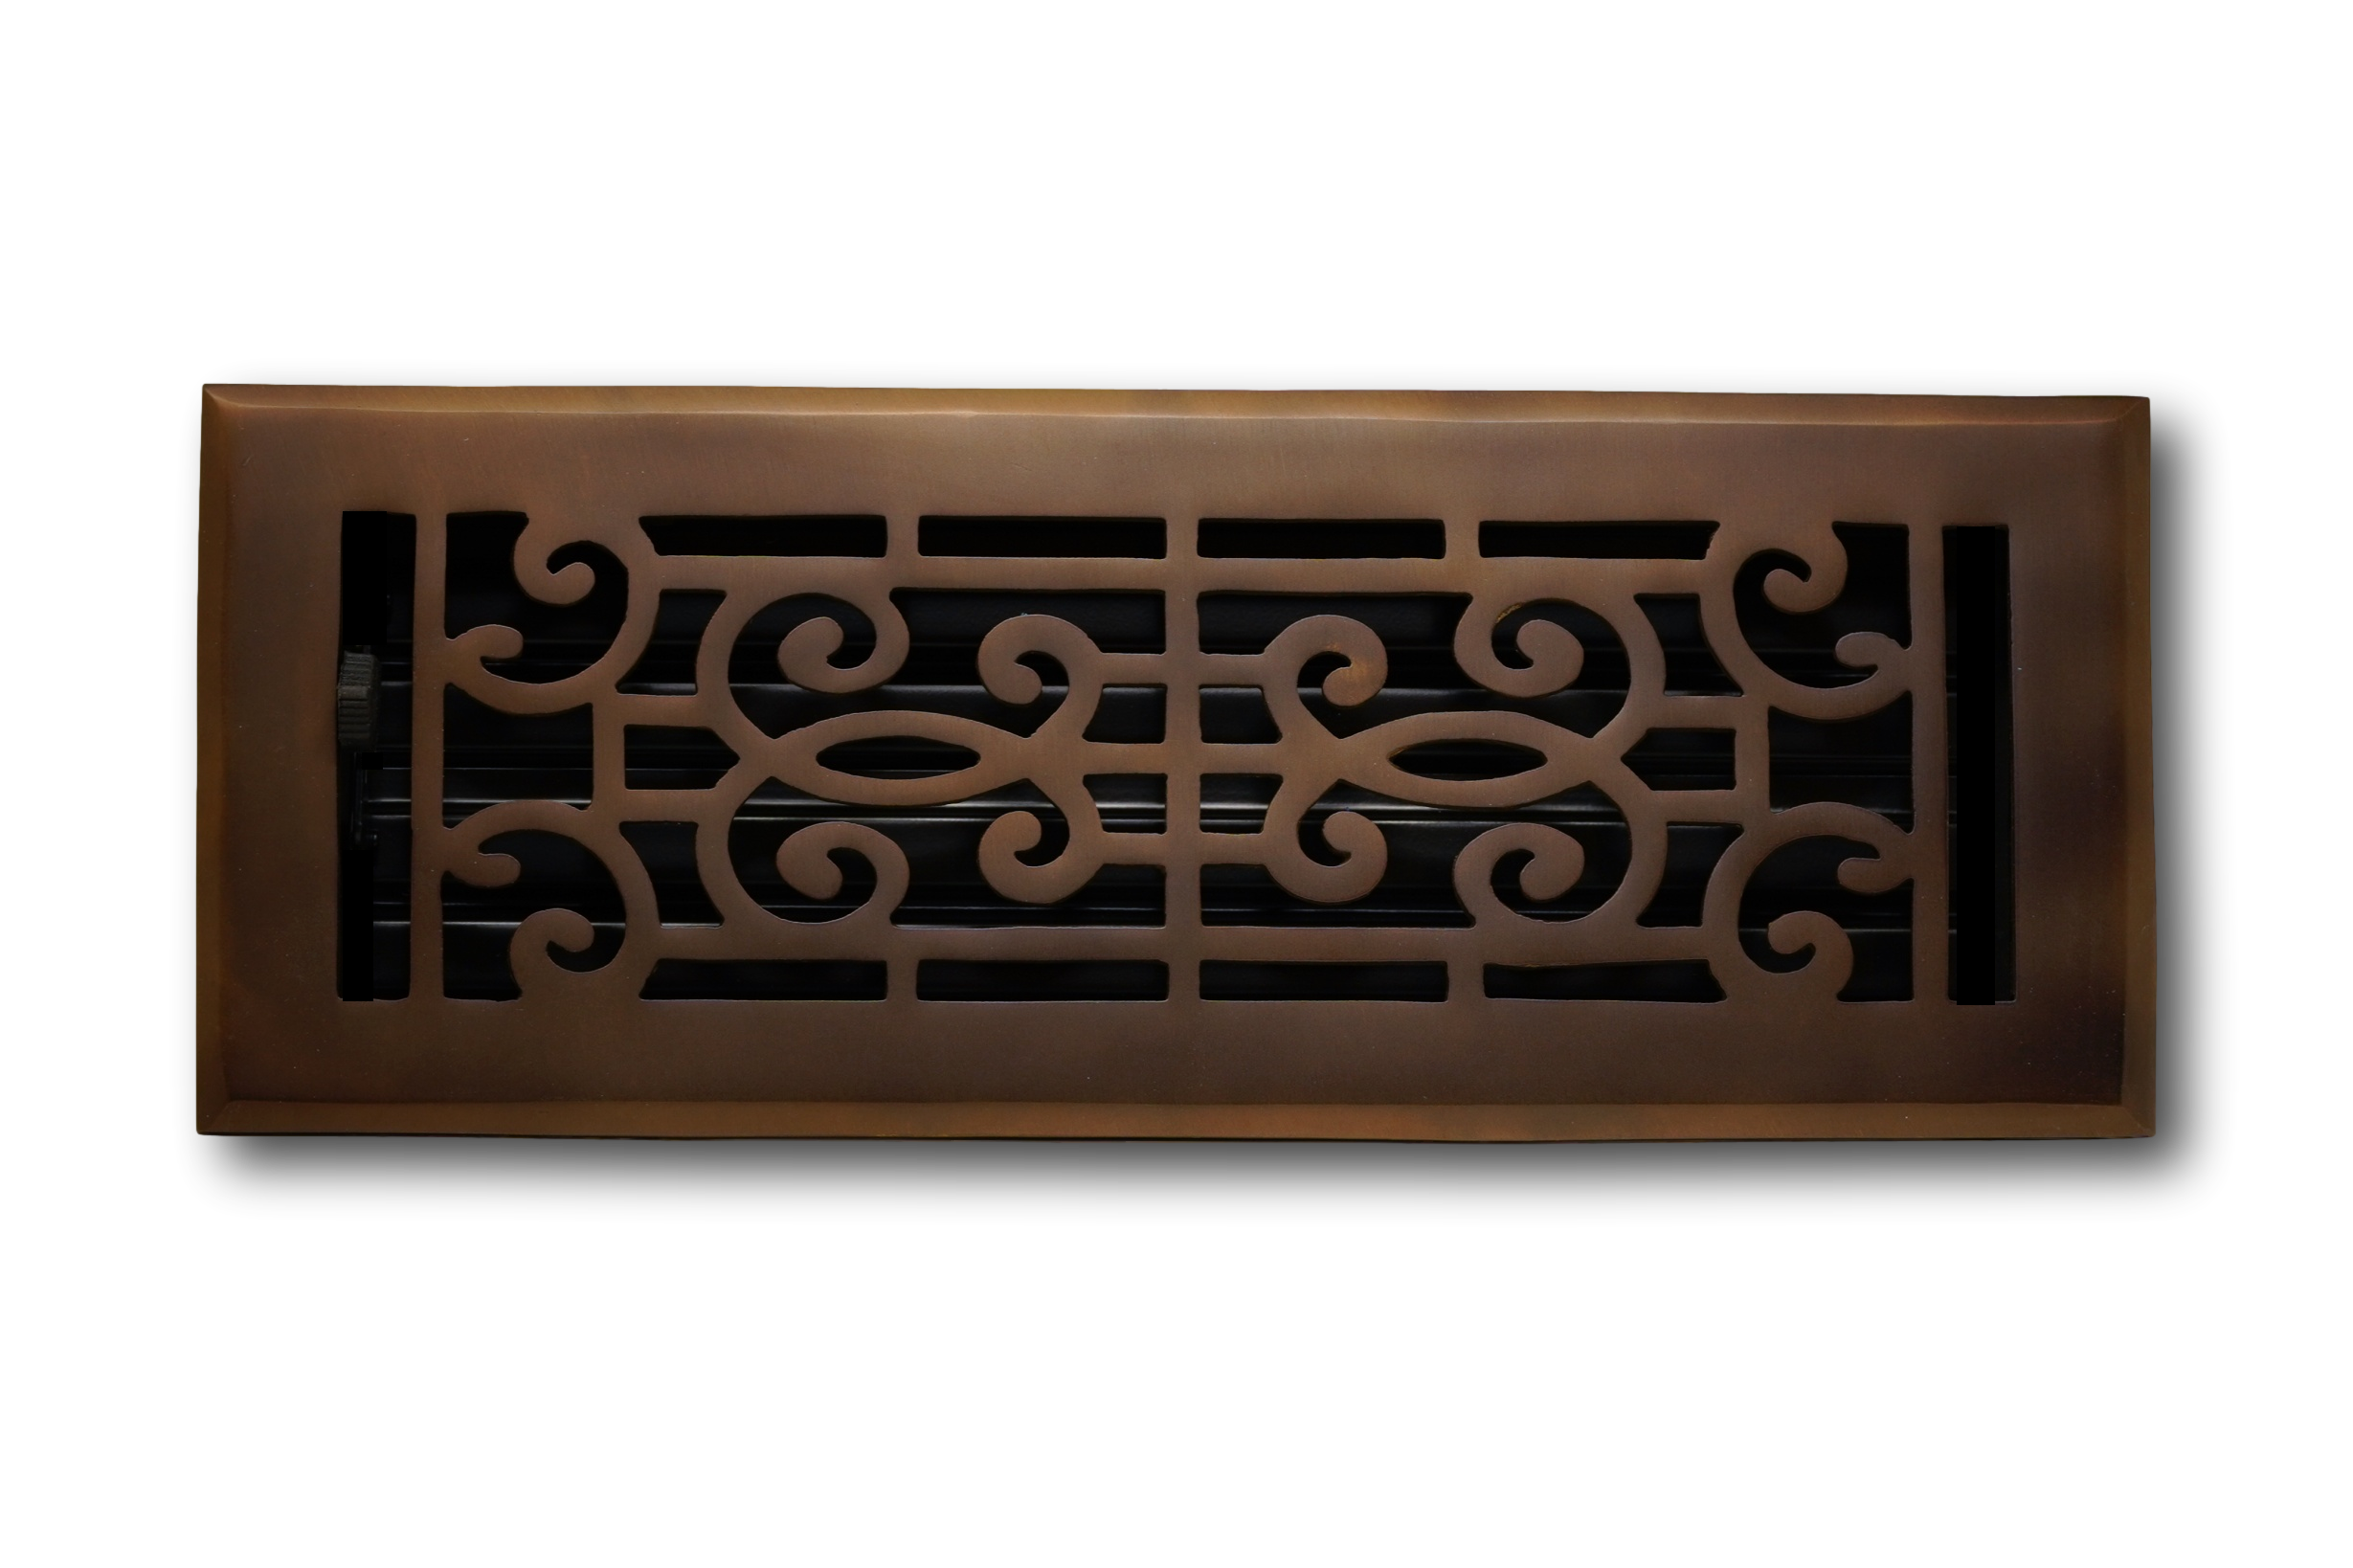 Cast Brass Baroque Vent Covers - Oil Rubbed Bronze